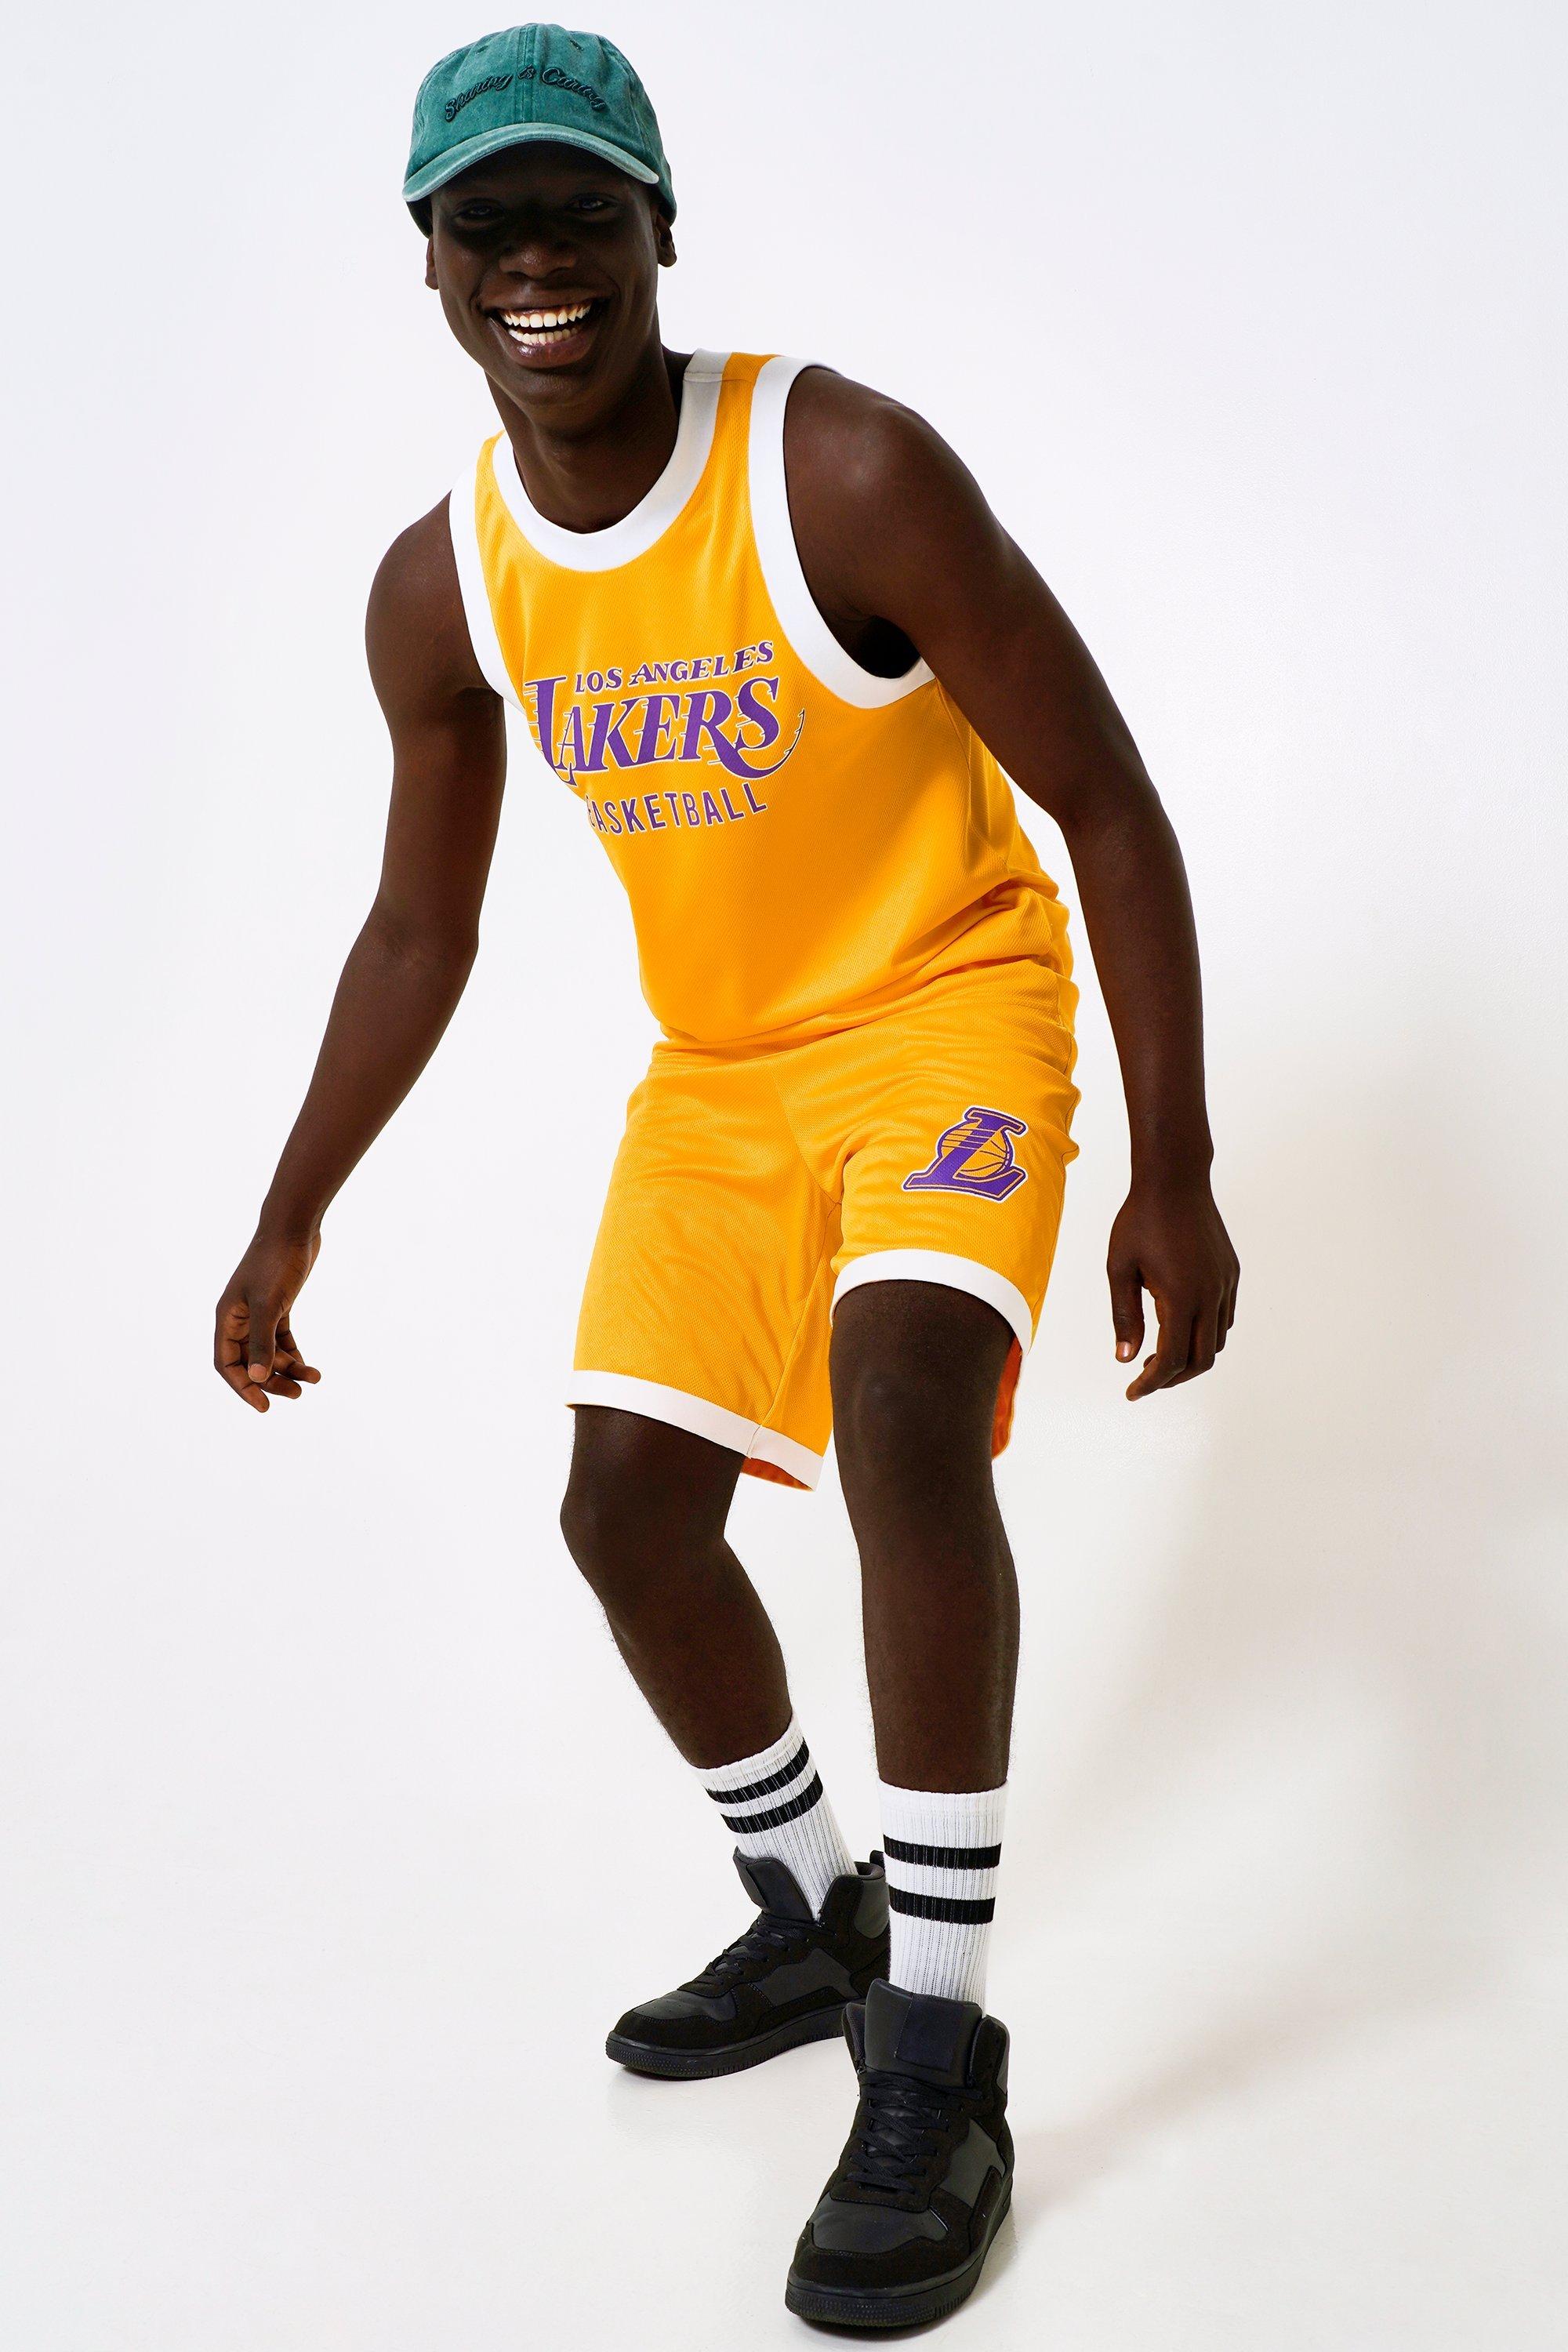 lakers shorts and top